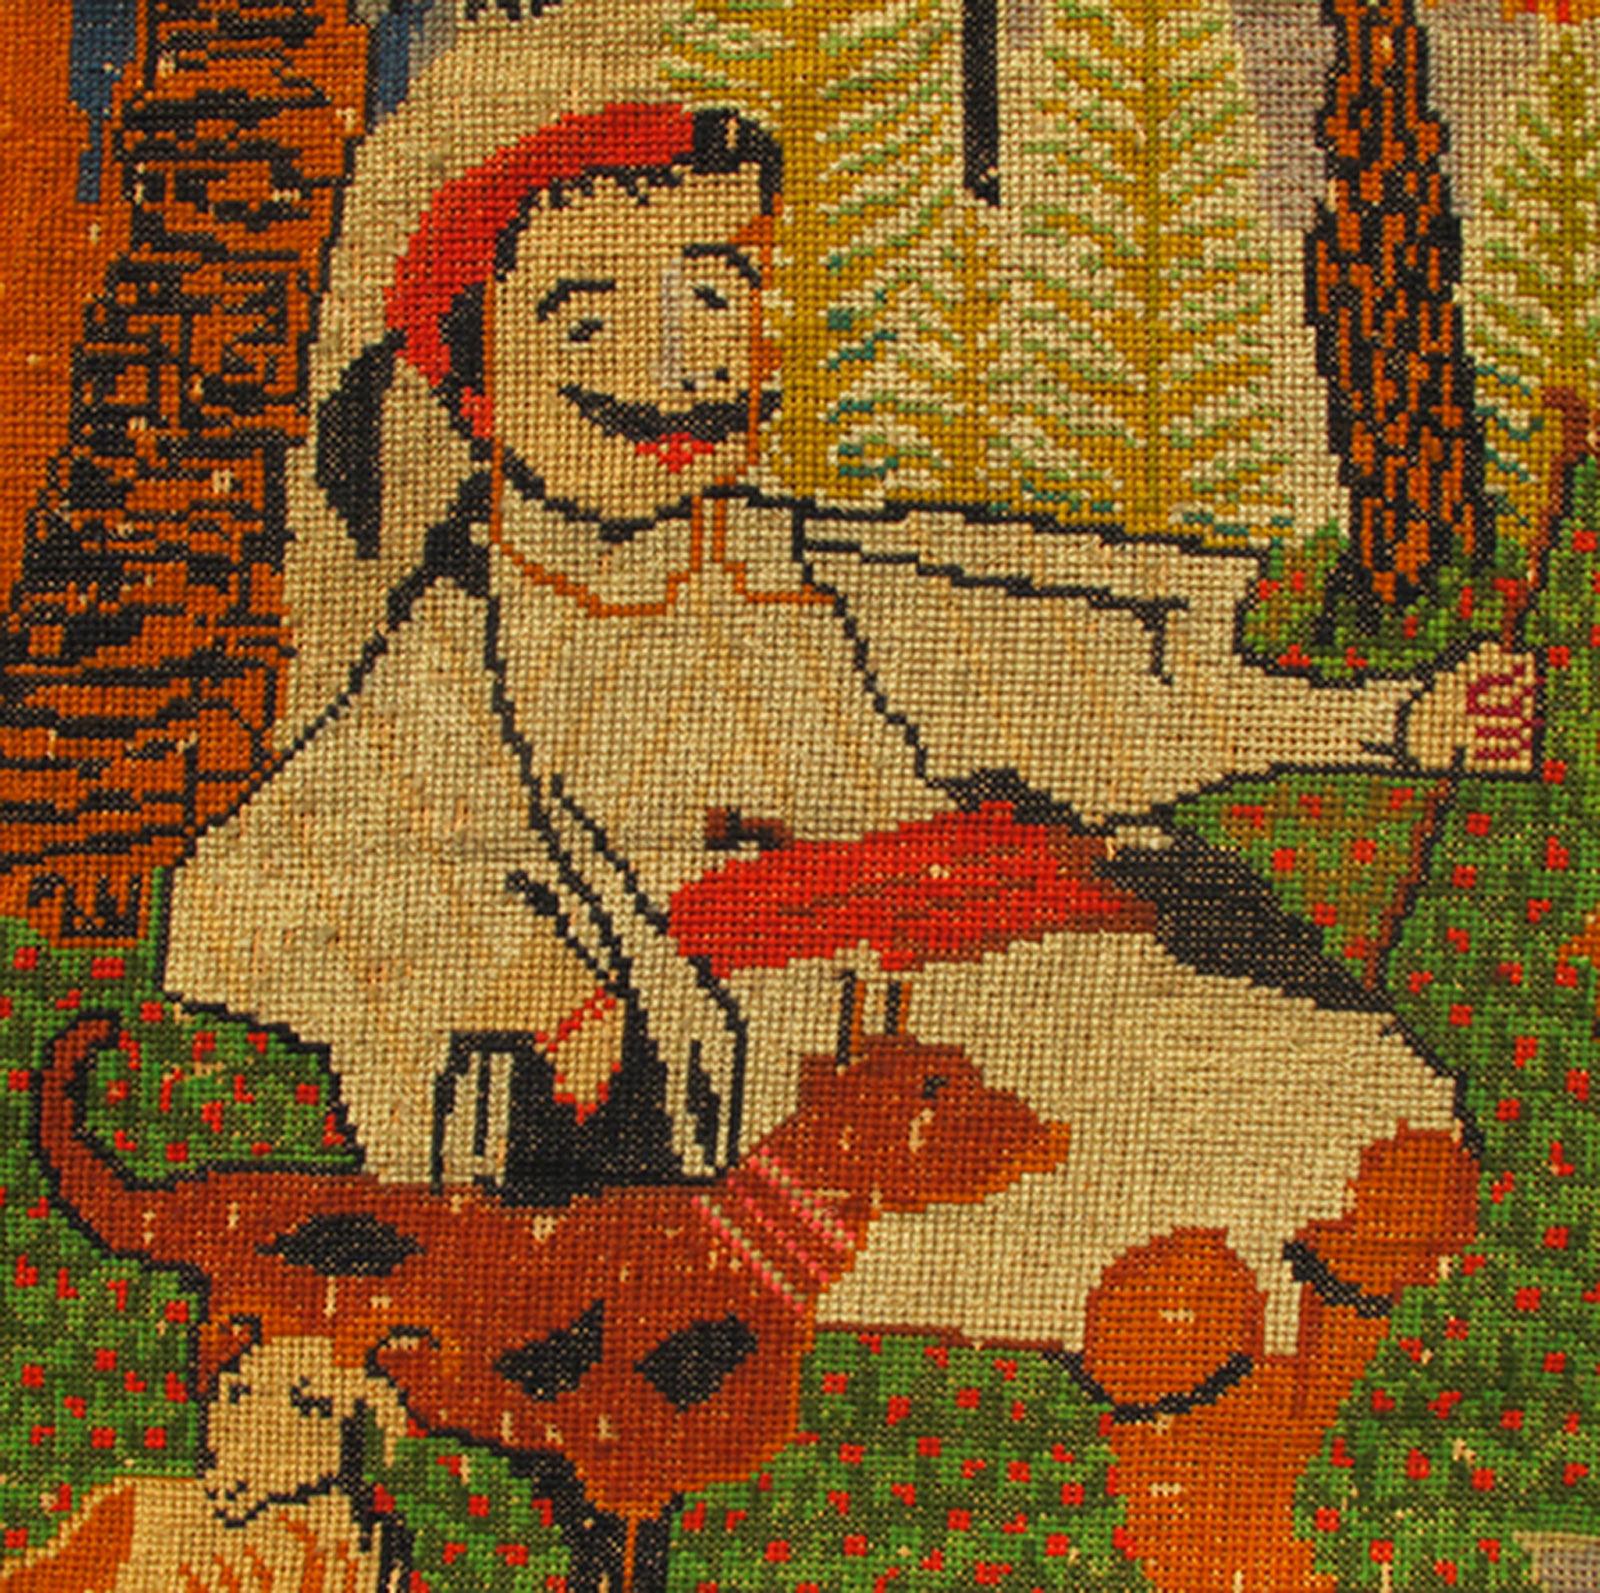 Hand-Knotted Antique European Folk Art Tapestry with Country Side Scene in Bright Colors